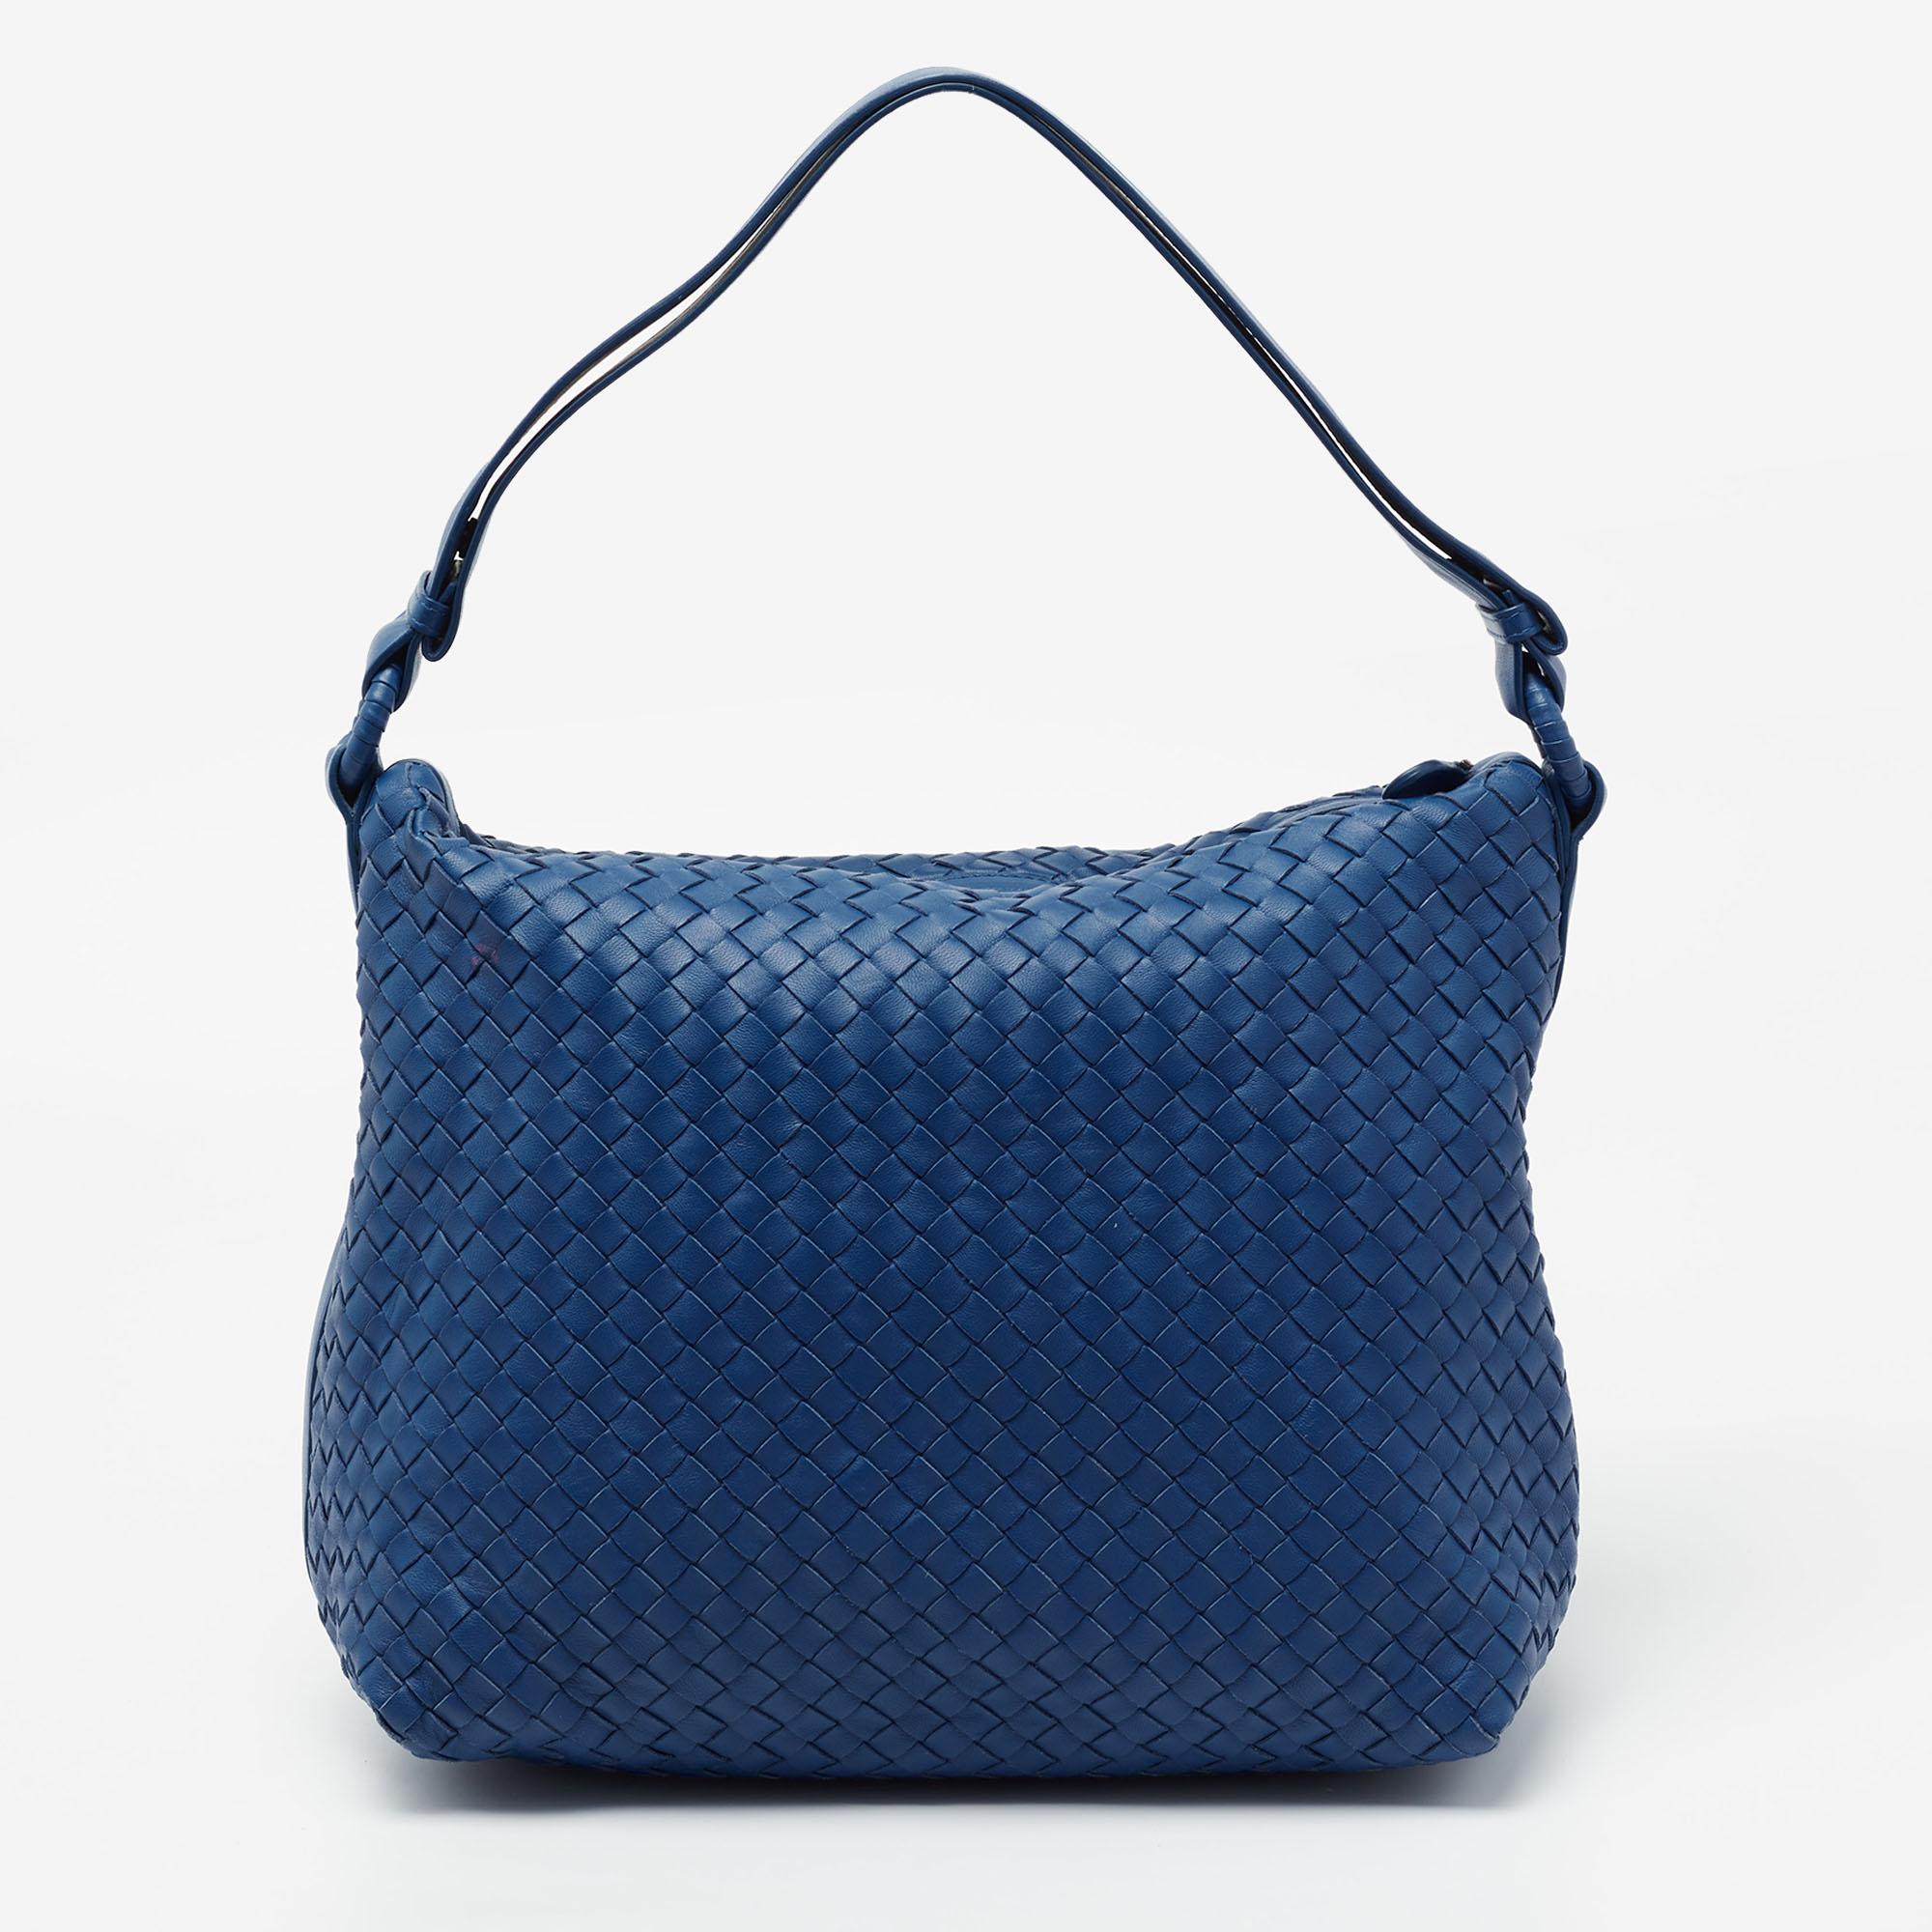 This Bottega Veneta shoulder bag presents the label's artistry in fine craftsmanship and classic designs. Woven in leather using their Intrecciato technique, it features a blue shade, a shoulder handle, and a well-sized interior for your